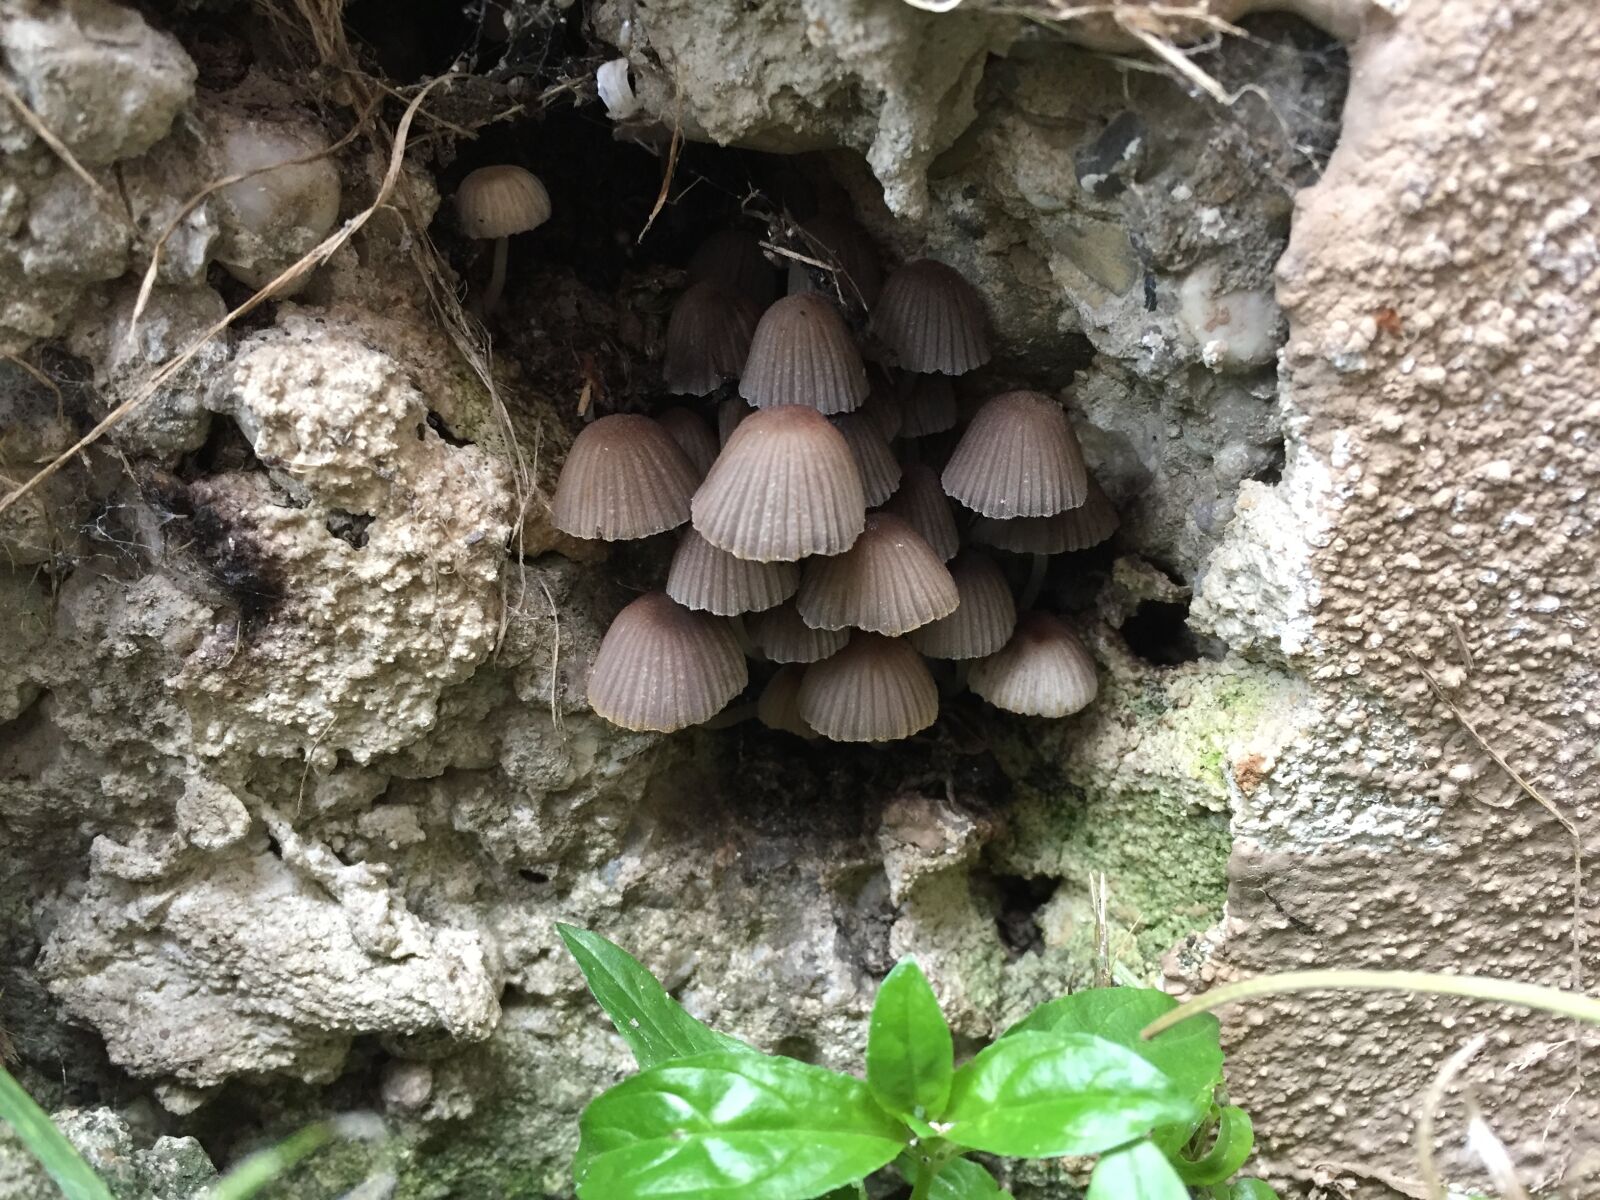 iPhone 6 back camera 4.15mm f/2.2 sample photo. Mushrooms, nature, forest photography